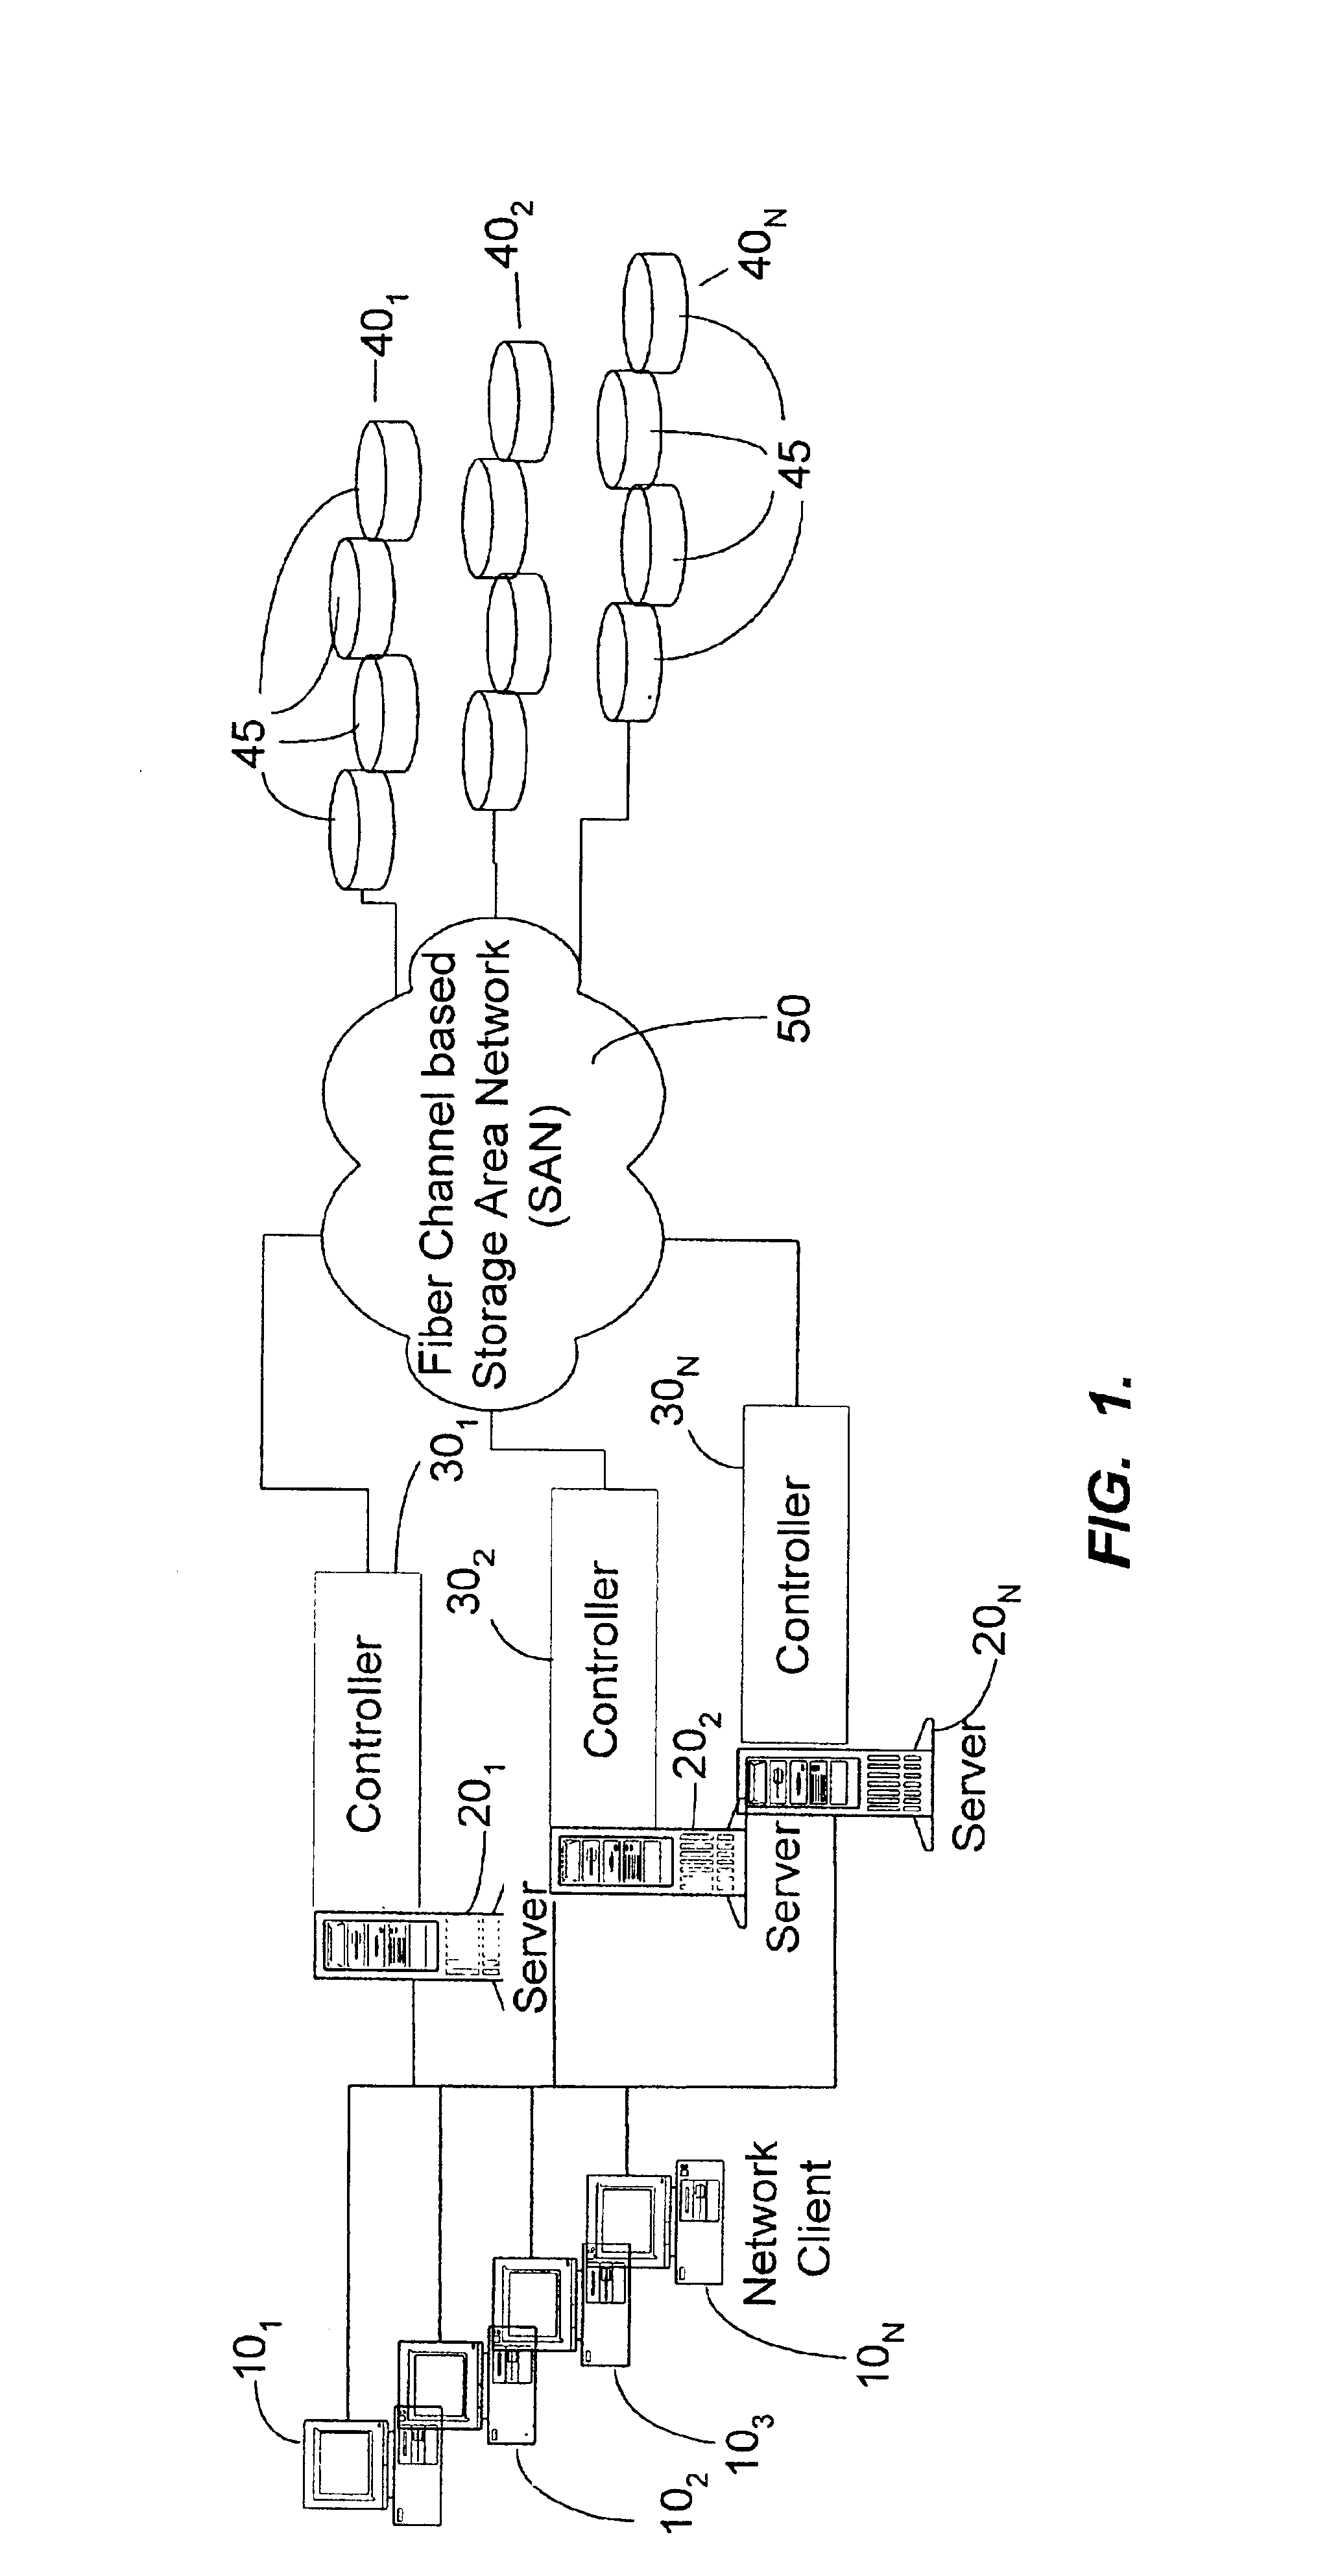 Methods and systems for implementing shared disk array management functions